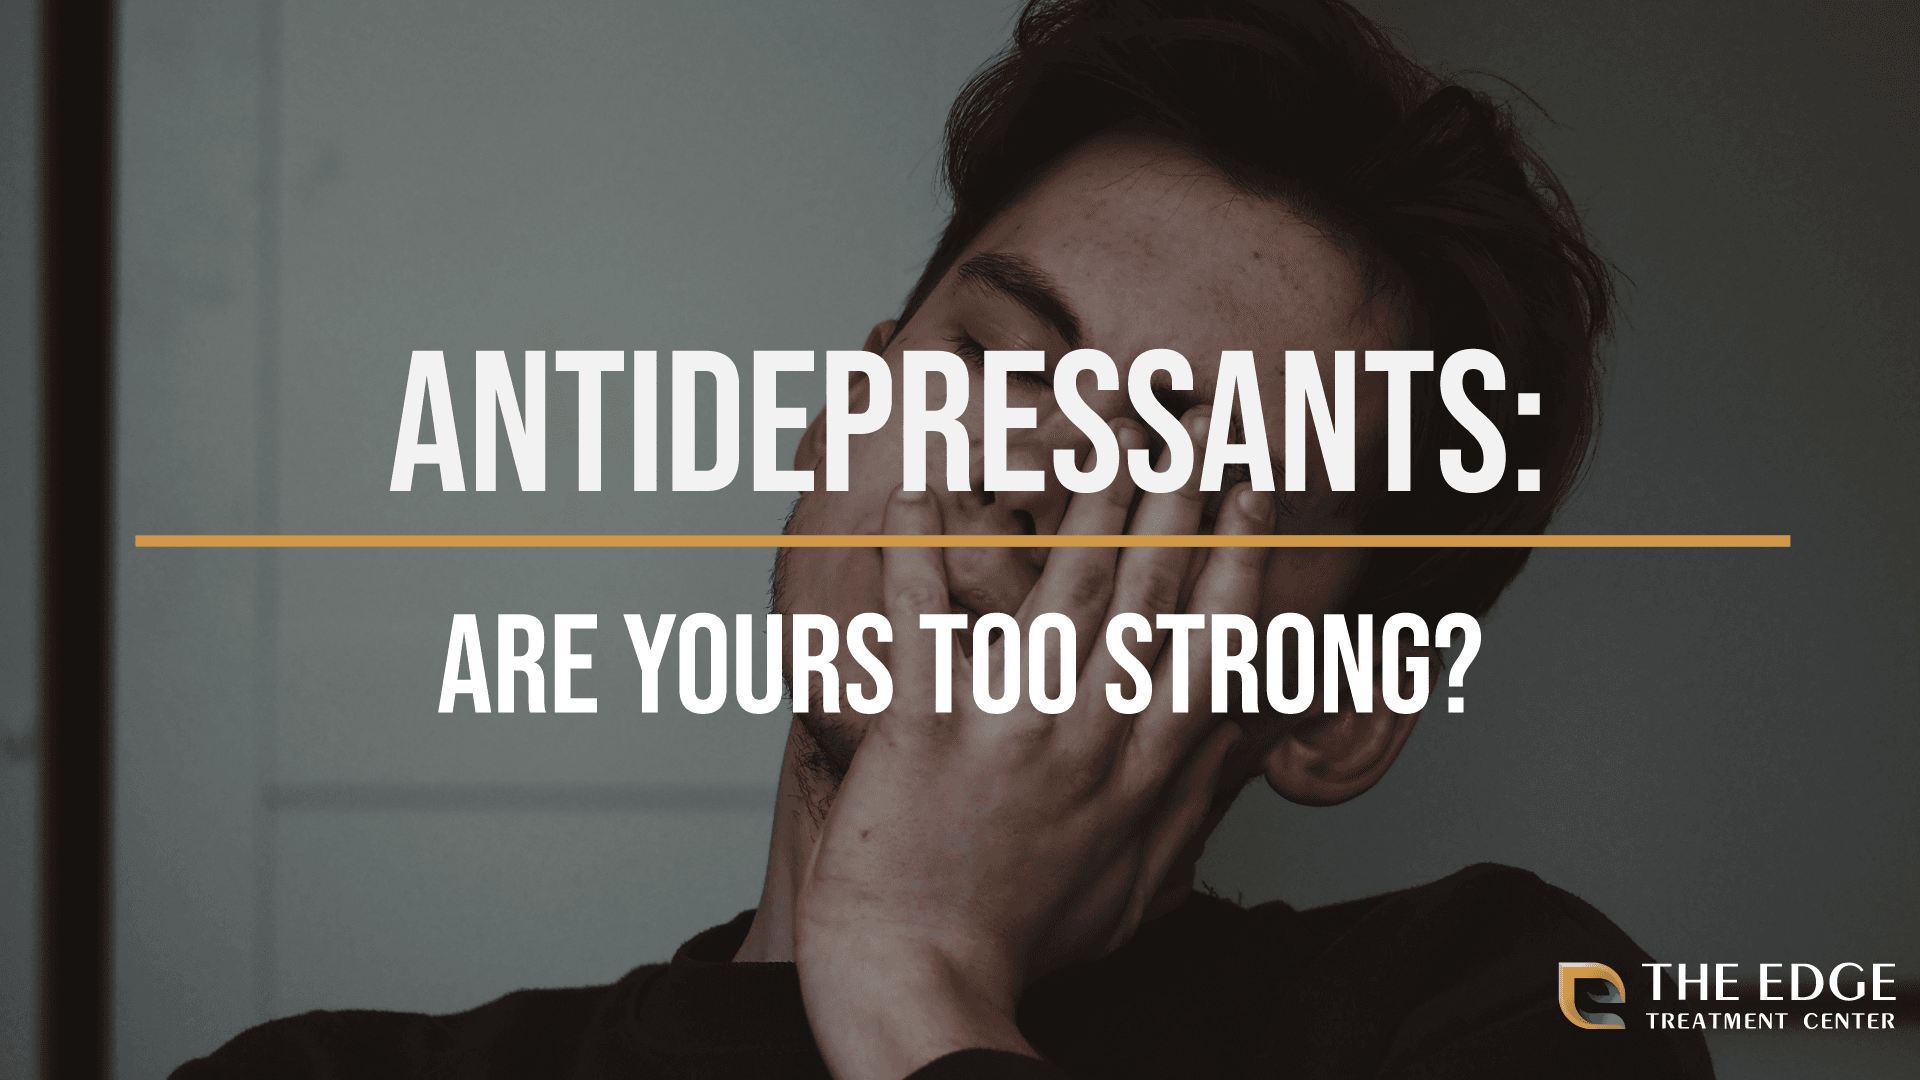 Are your antidepressants too strong?